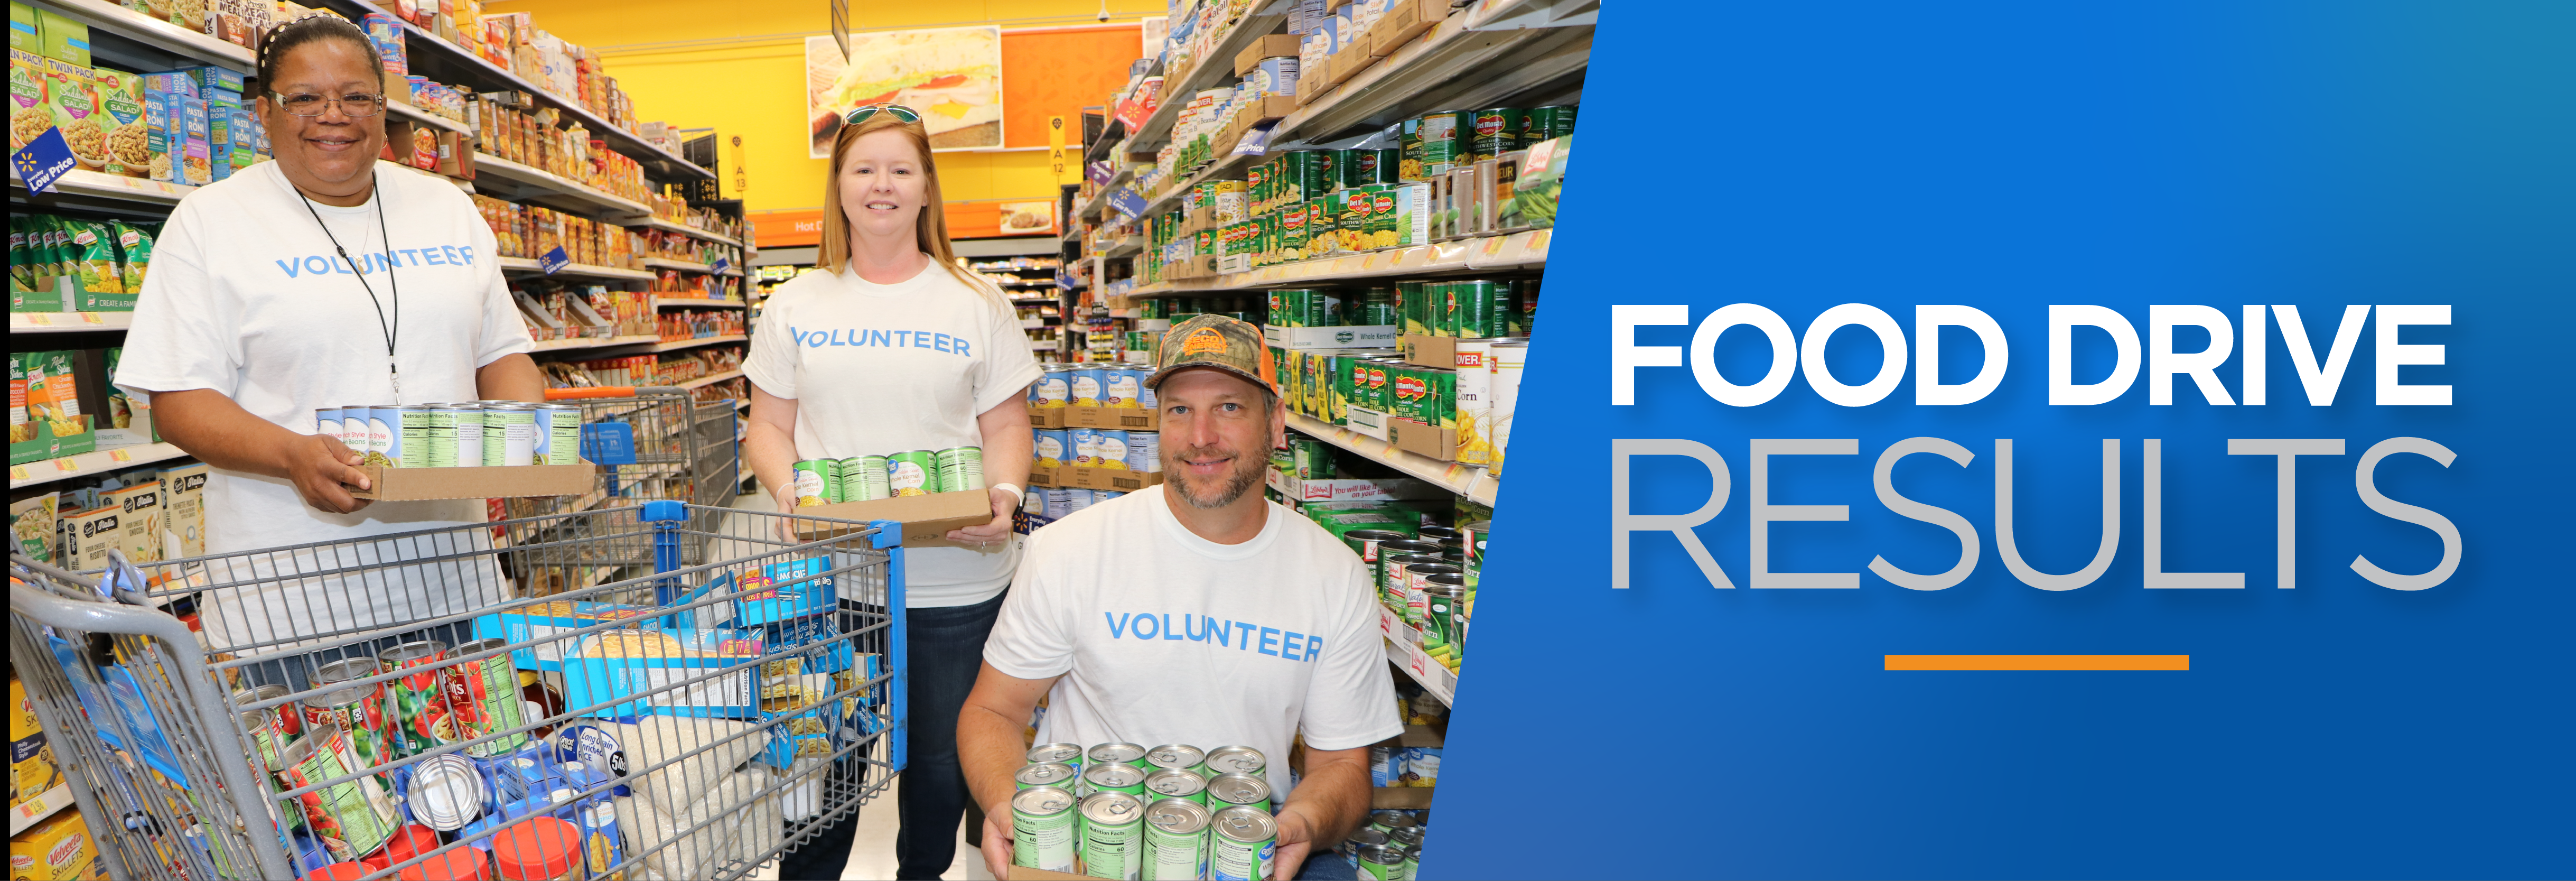 2019 Annual Meeting Food Drive Results May 2019 SECO News